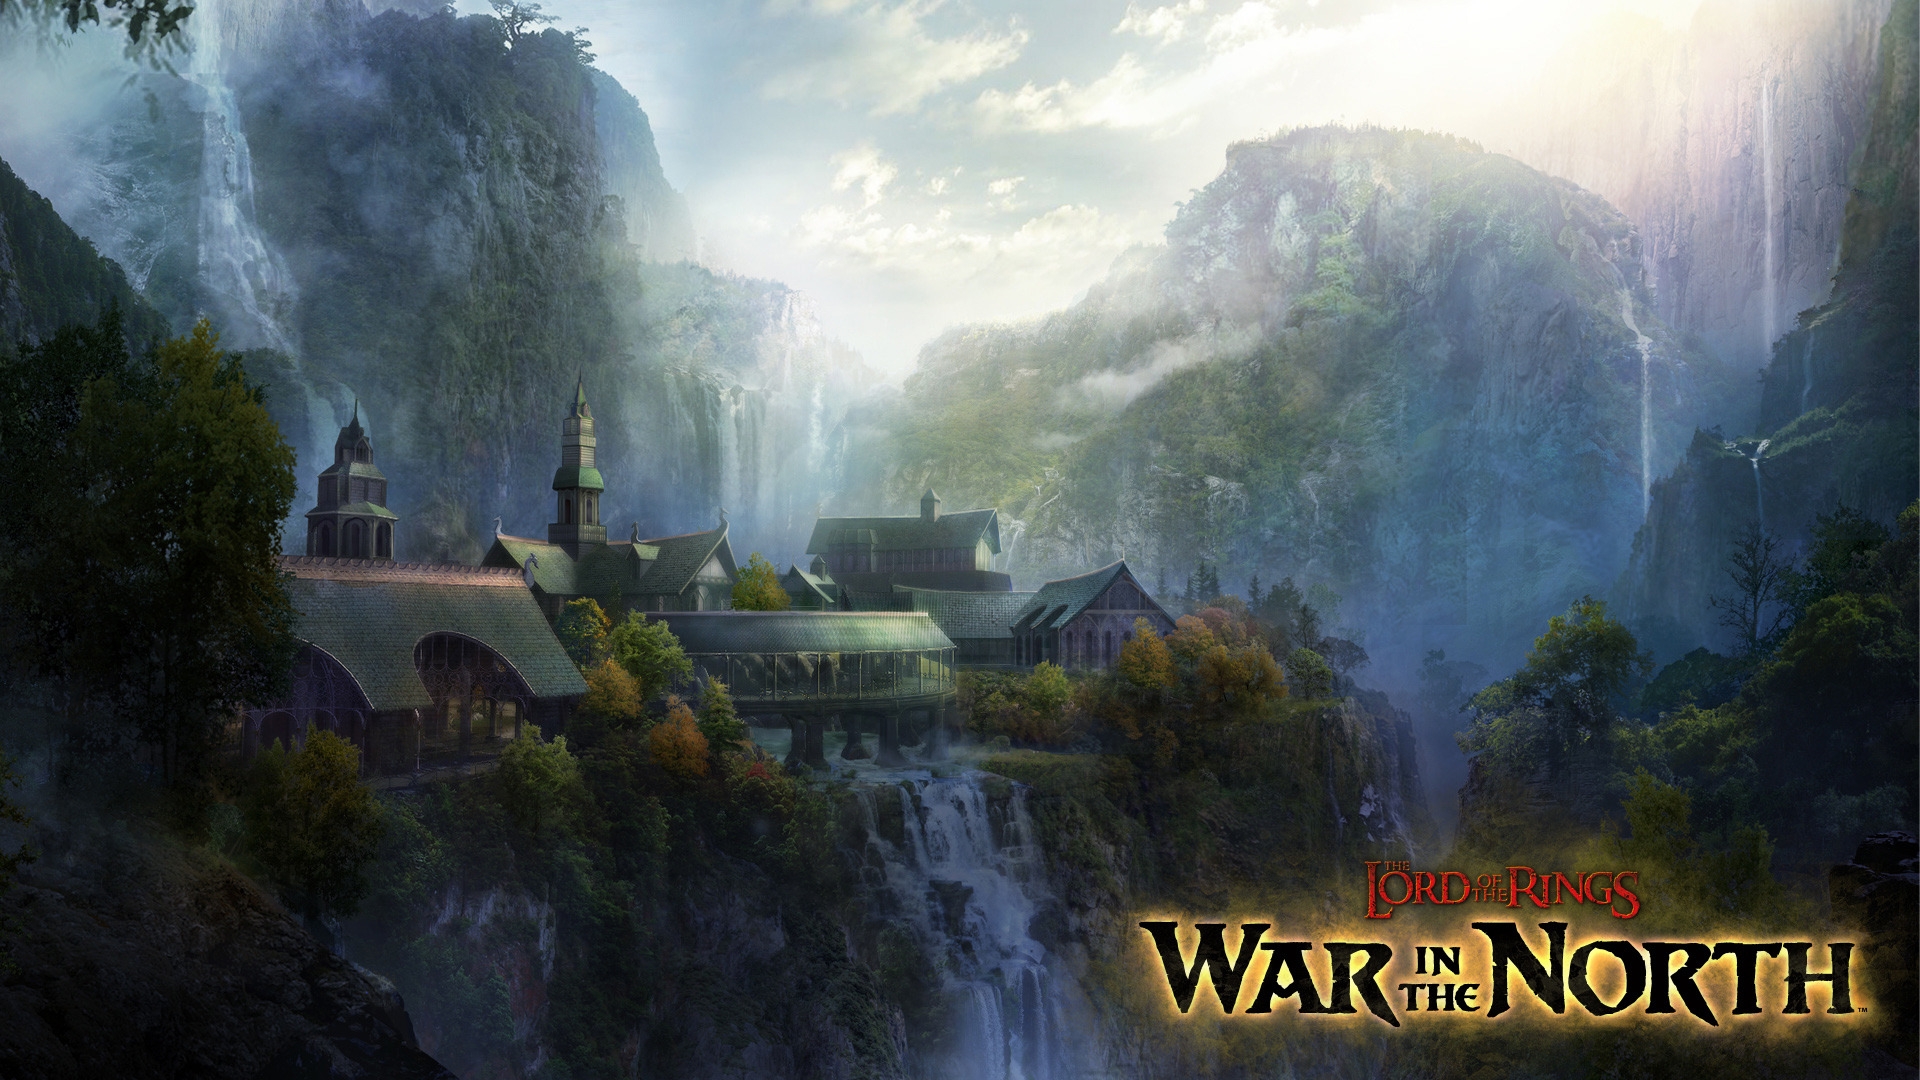 Rivendell War in the North for 1920 x 1080 HDTV 1080p resolution